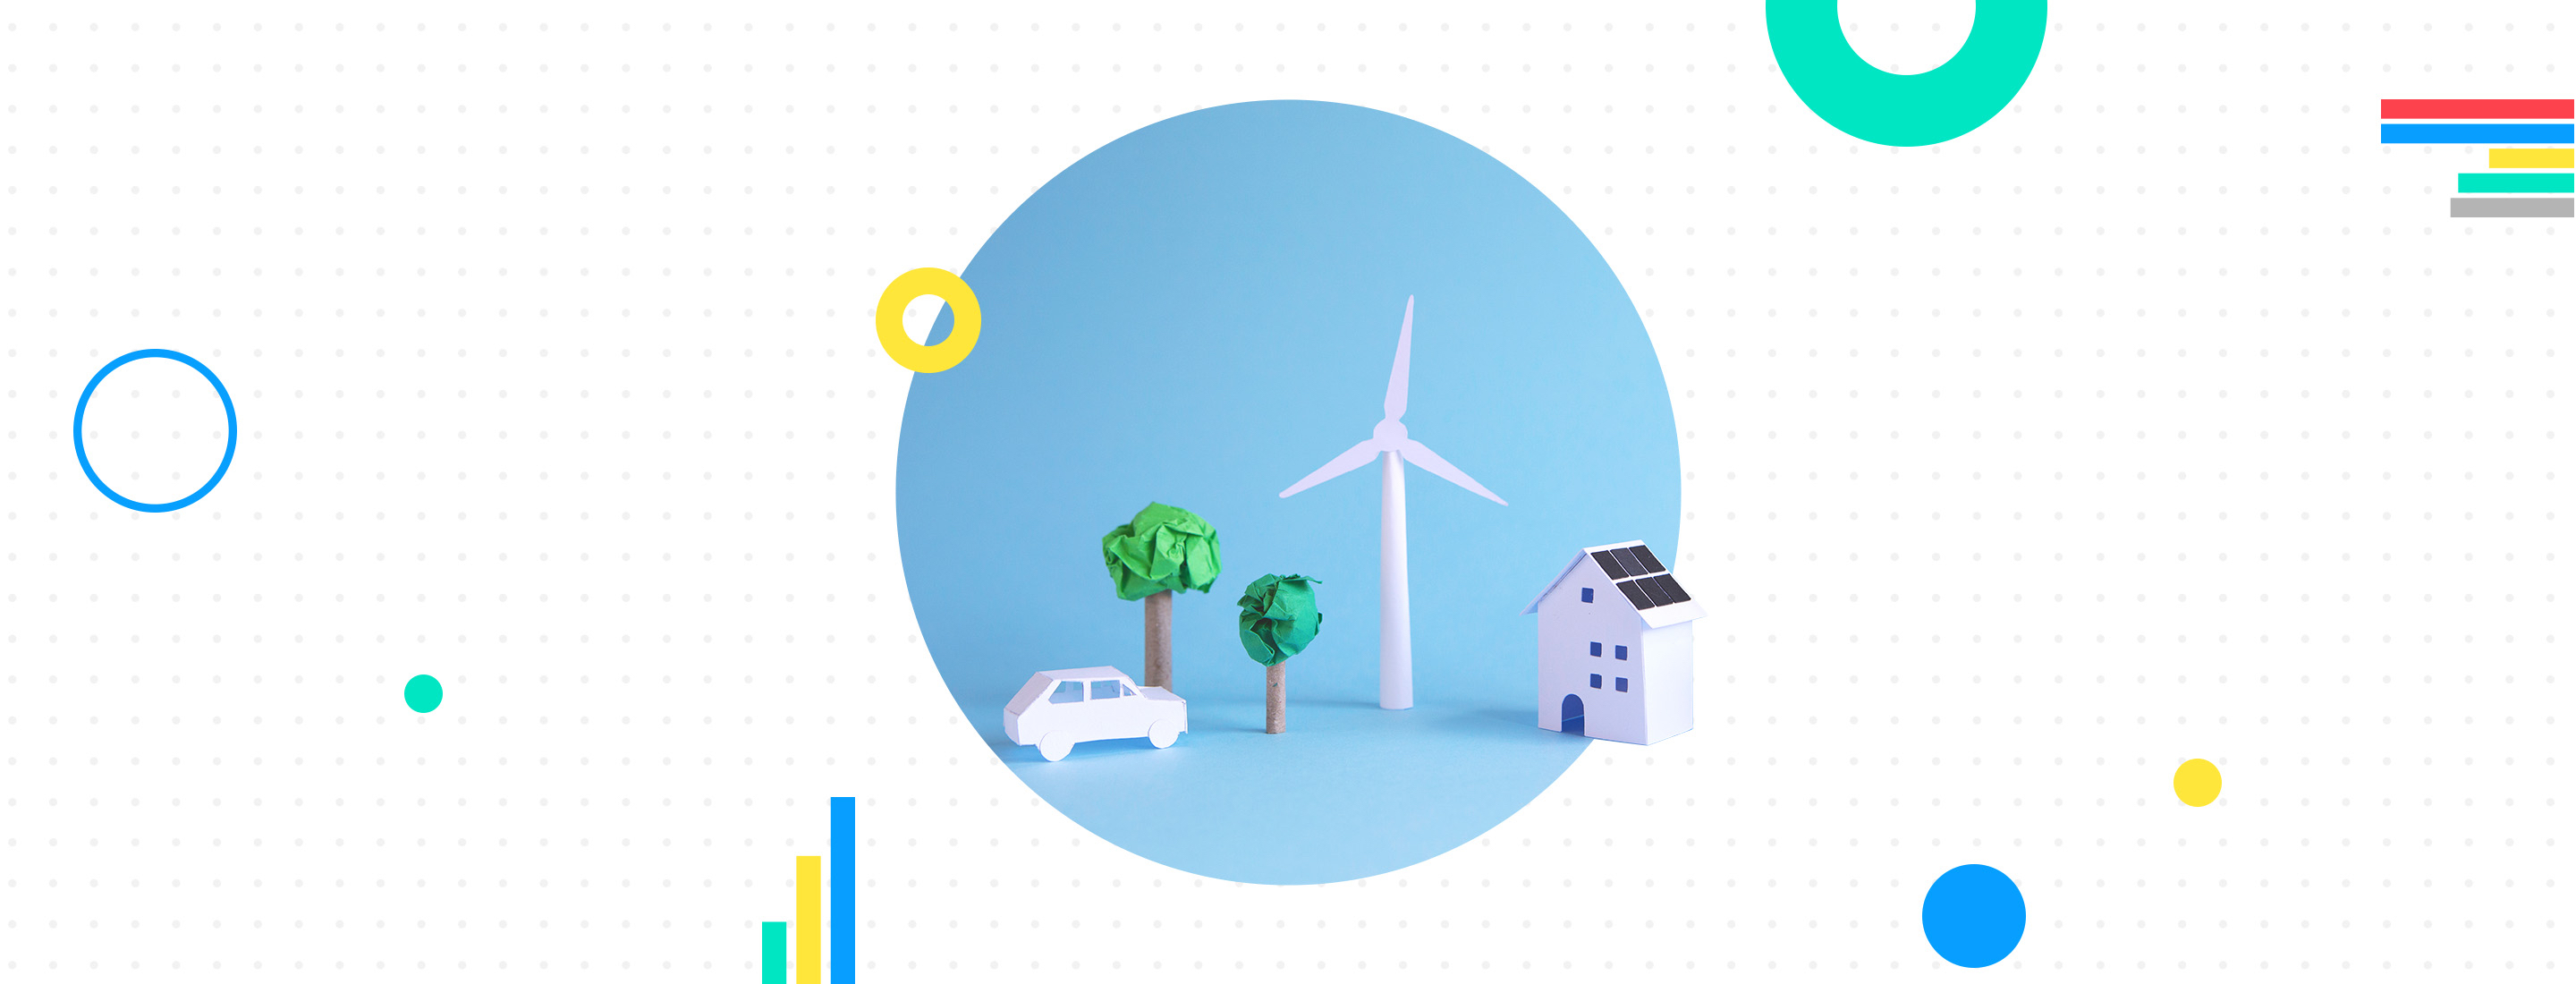 Header image showing a house with solar panels, windmill, car and trees made from paper.